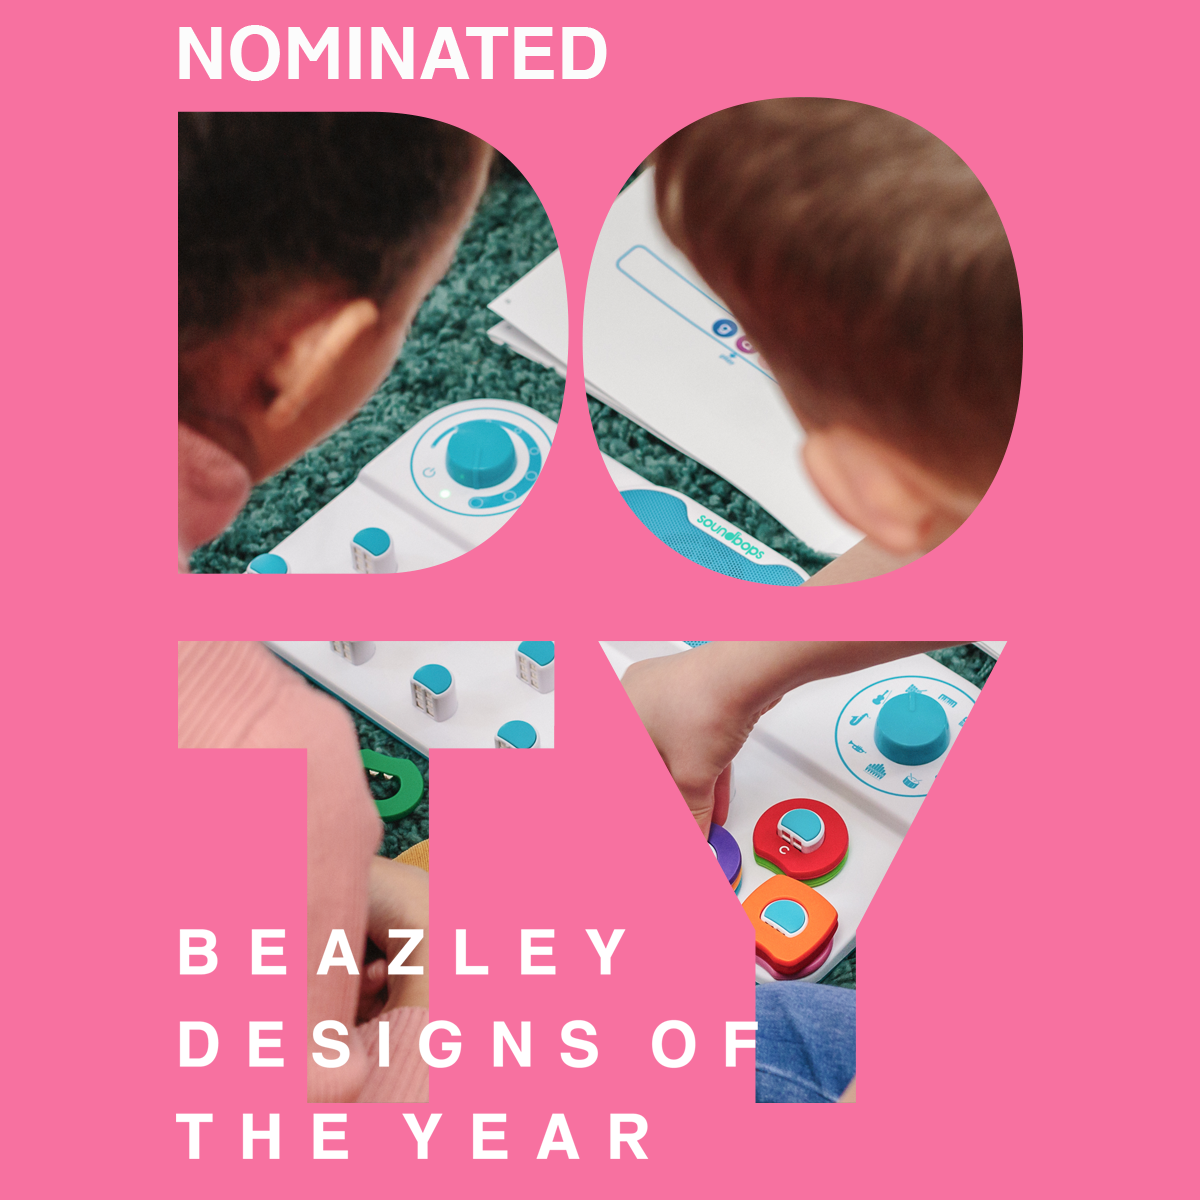 Soundbops has been nominated for Beazley Designs of the Year 2020!